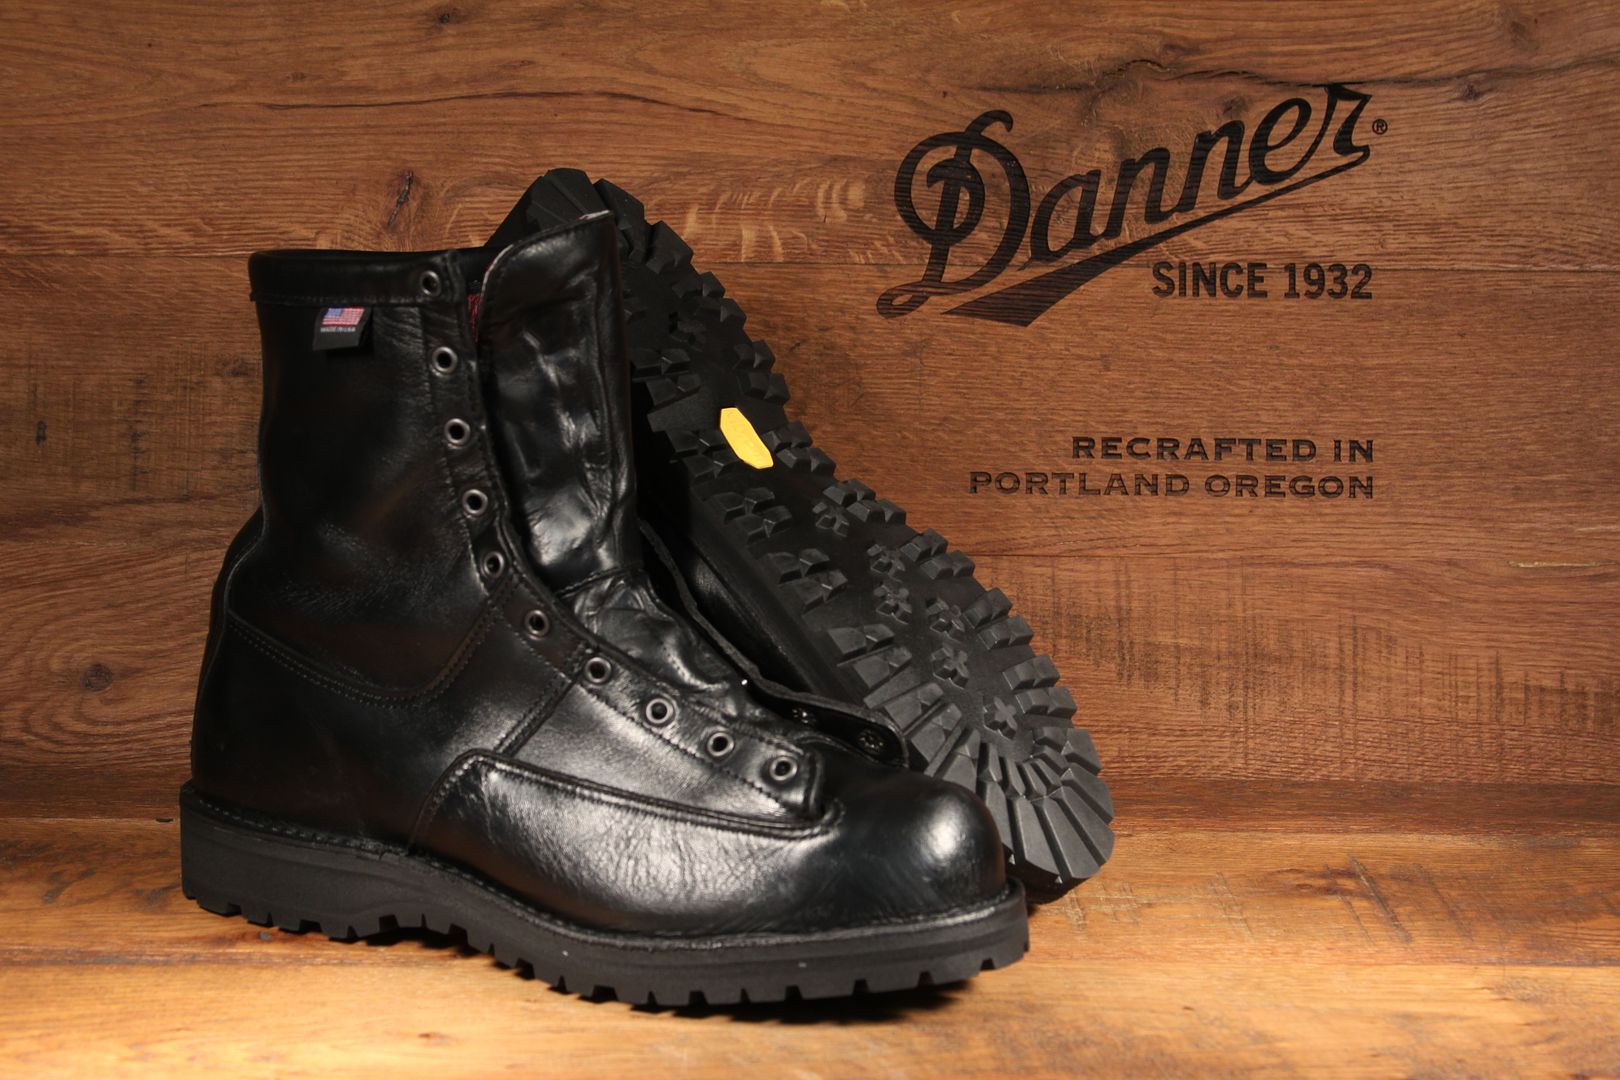 Danner Recon boots back to be recrafted 